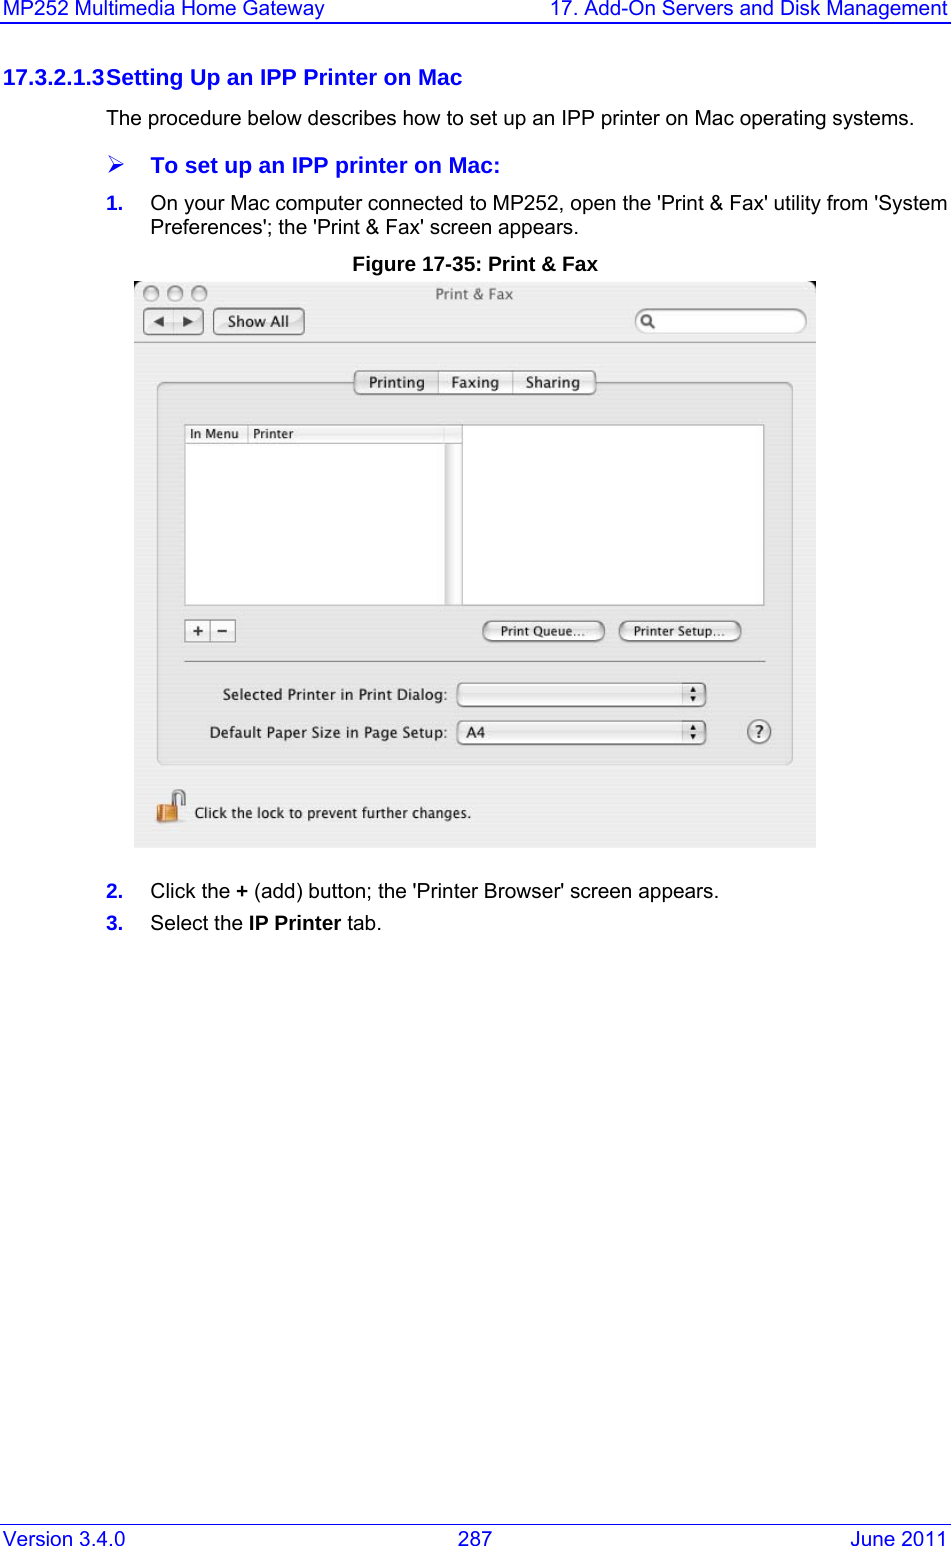 MP252 Multimedia Home Gateway  17. Add-On Servers and Disk Management Version 3.4.0  287  June 2011 17.3.2.1.3 Setting Up an IPP Printer on Mac The procedure below describes how to set up an IPP printer on Mac operating systems. ¾ To set up an IPP printer on Mac: 1.  On your Mac computer connected to MP252, open the &apos;Print &amp; Fax&apos; utility from &apos;System Preferences&apos;; the &apos;Print &amp; Fax&apos; screen appears. Figure 17-35: Print &amp; Fax  2.  Click the + (add) button; the &apos;Printer Browser&apos; screen appears.  3.  Select the IP Printer tab. 